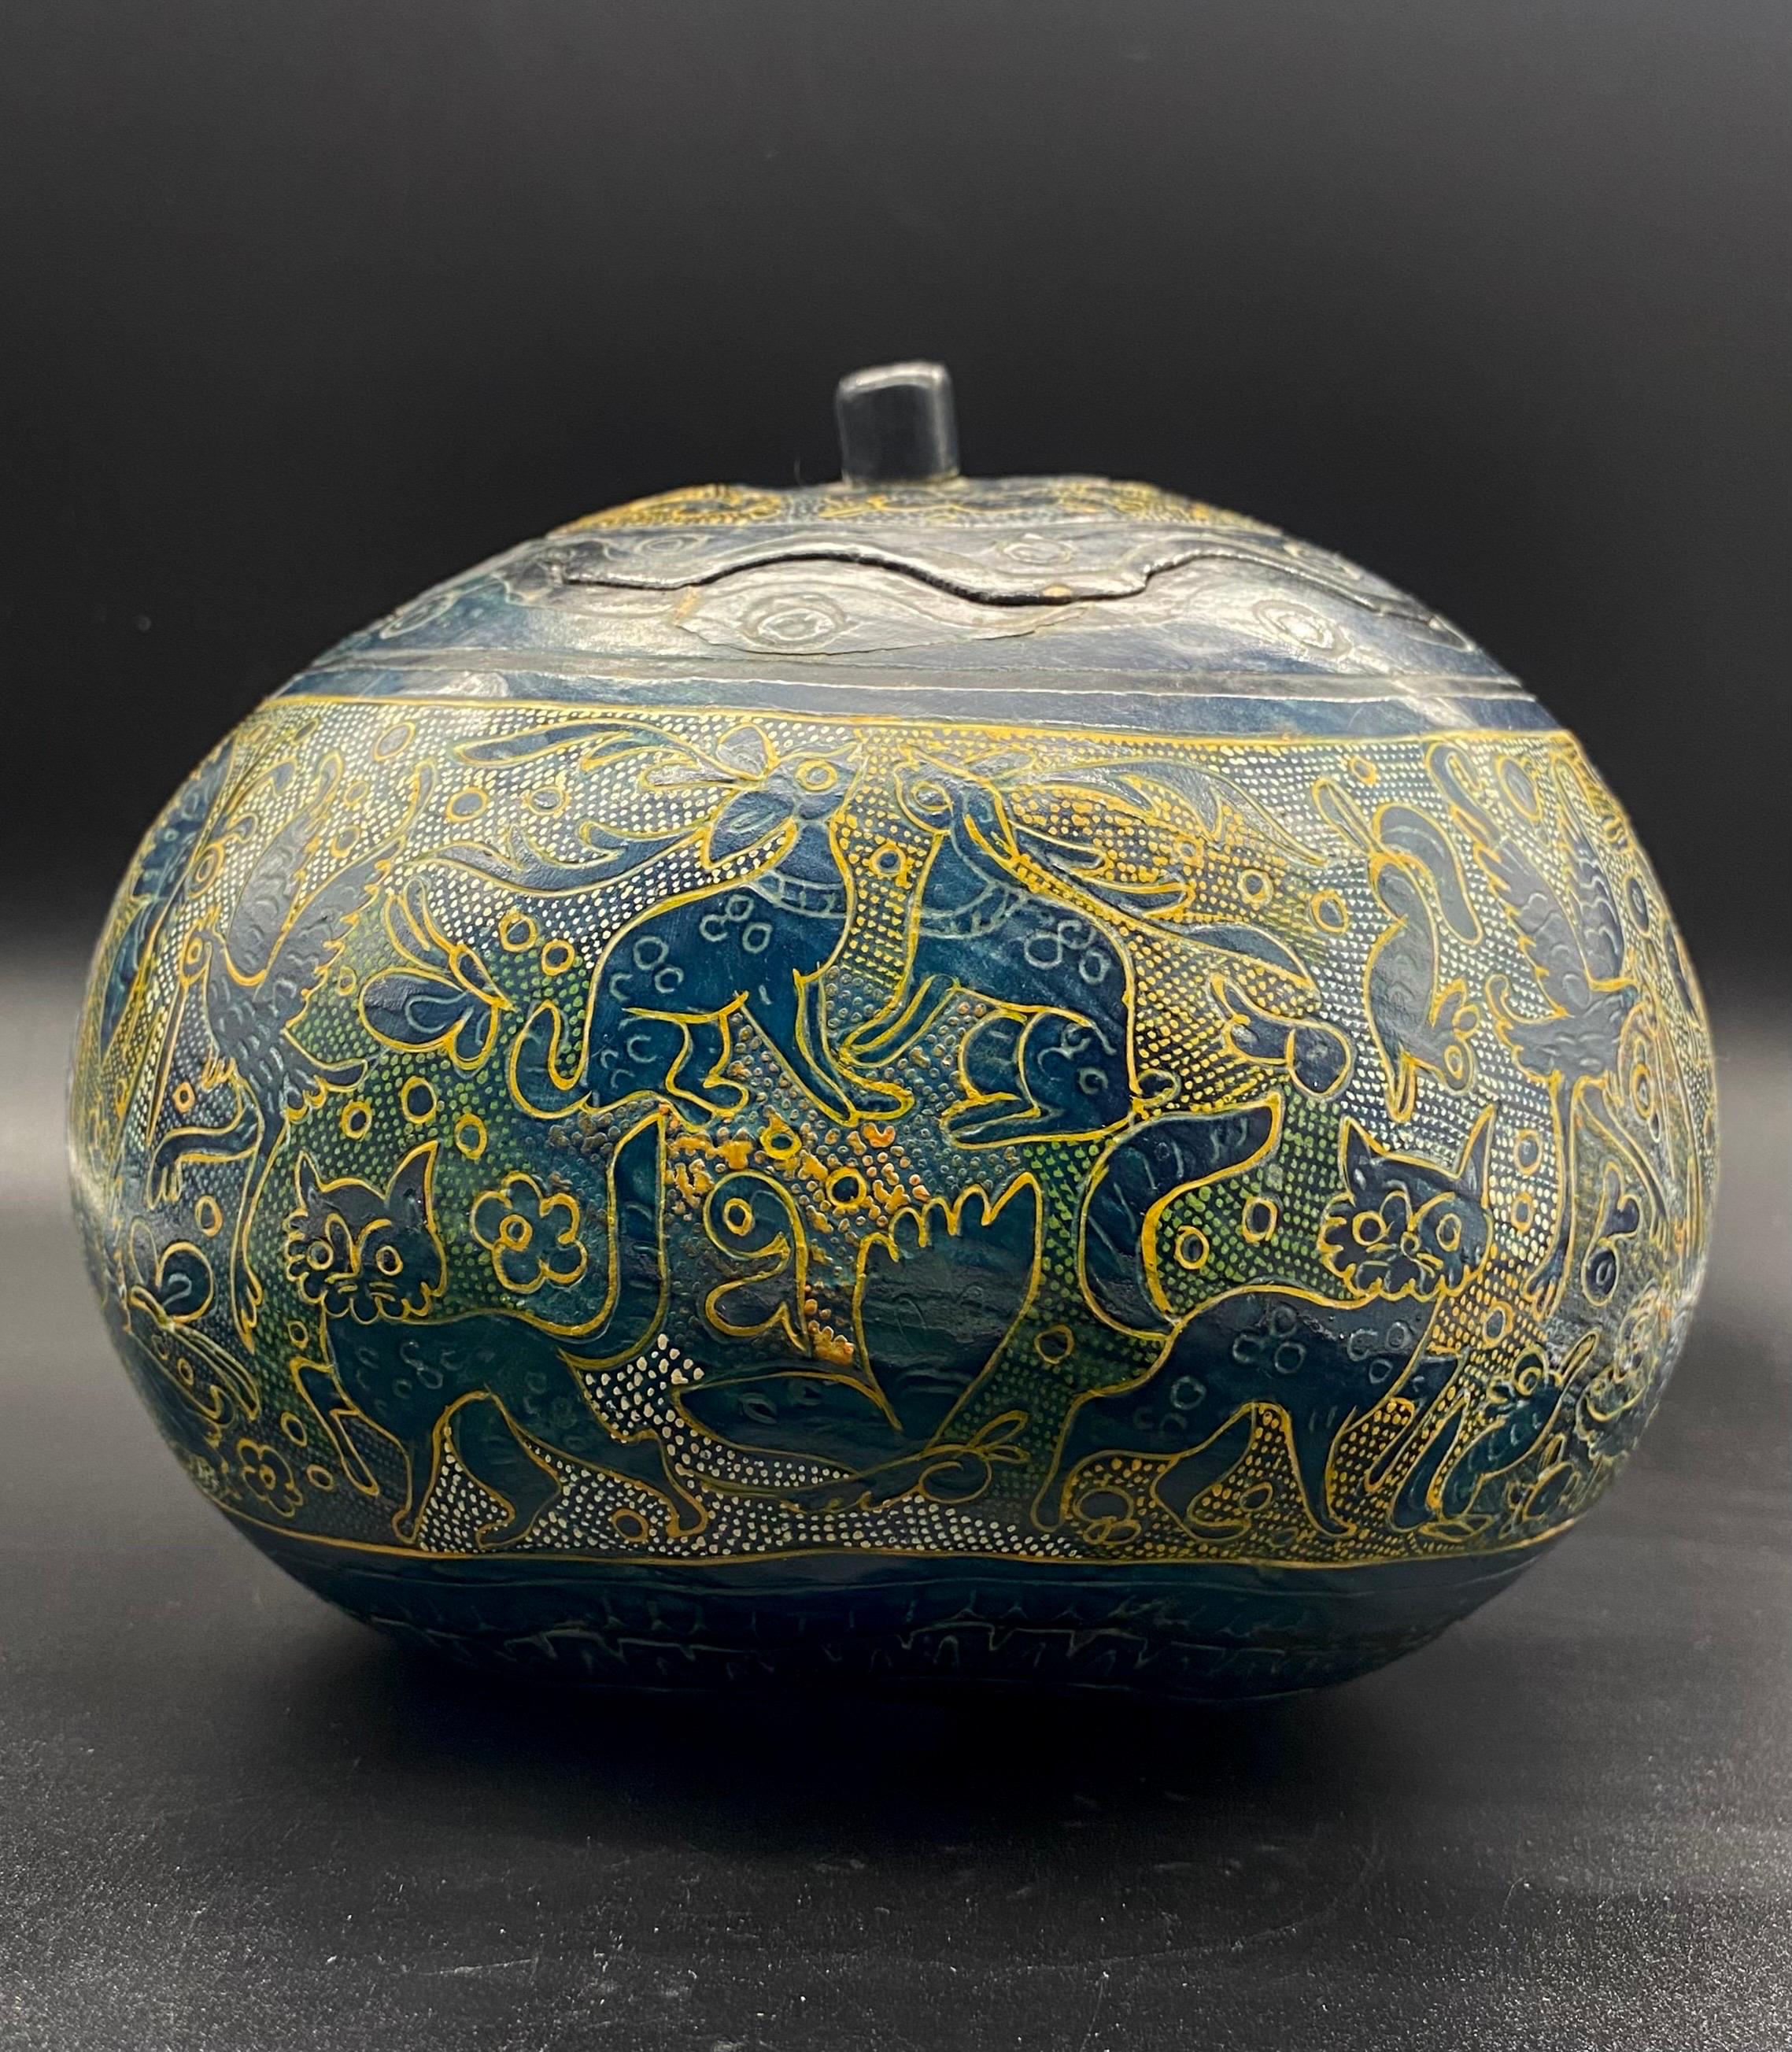 Beautiful lacquered paper mache box decorated with imaginary animals (that look like cats) and plant motifs.
The box seems to take the shape of a vegetable or cucurbit / gourd.
The paper mache (or boiled cardboard) is painted black (with dark blue